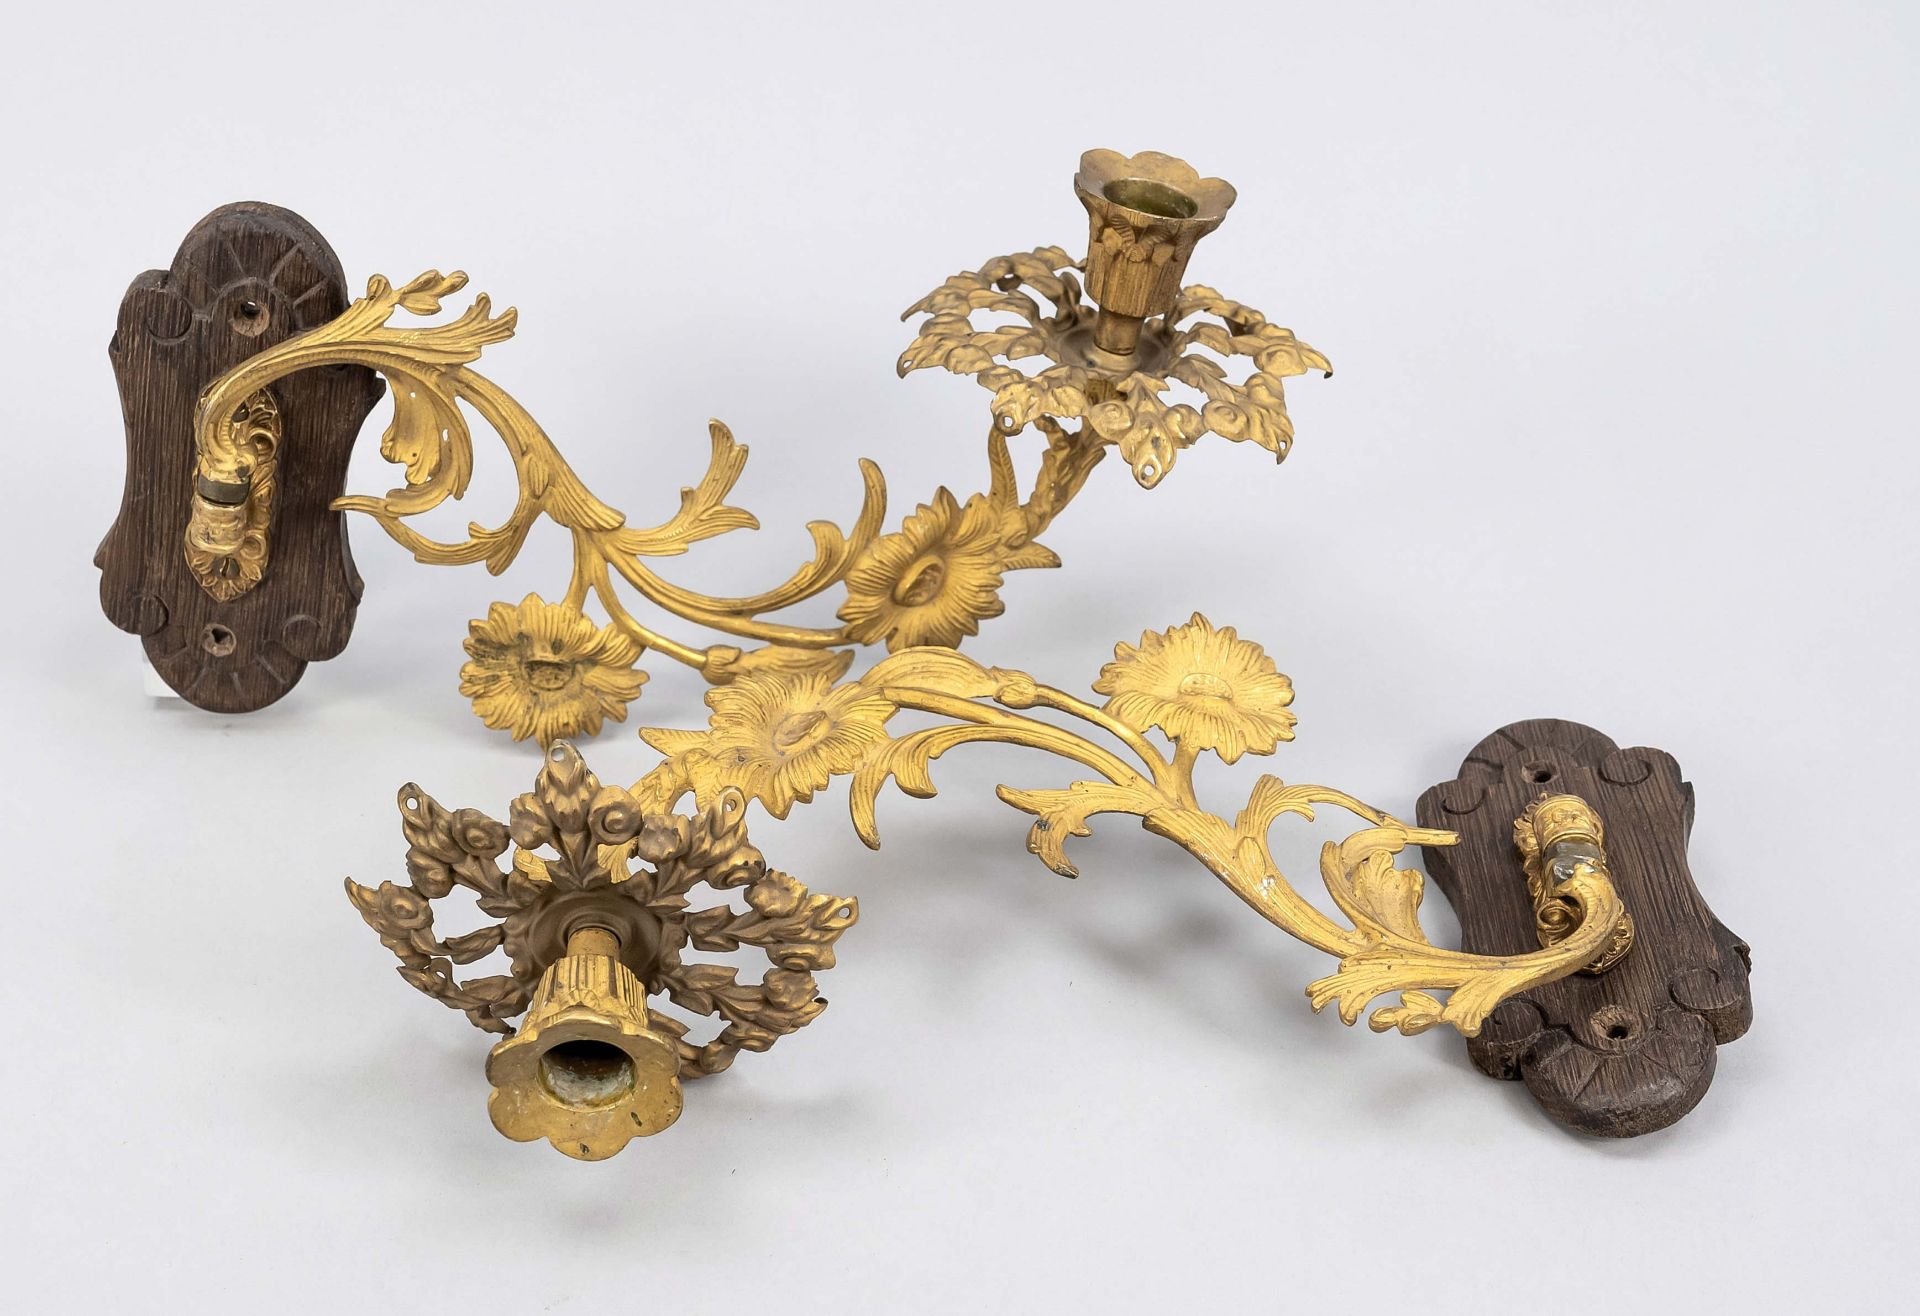 Pair of Historism piano chandeliers, late 19th c. Gilded chandelier arms as openwork floral